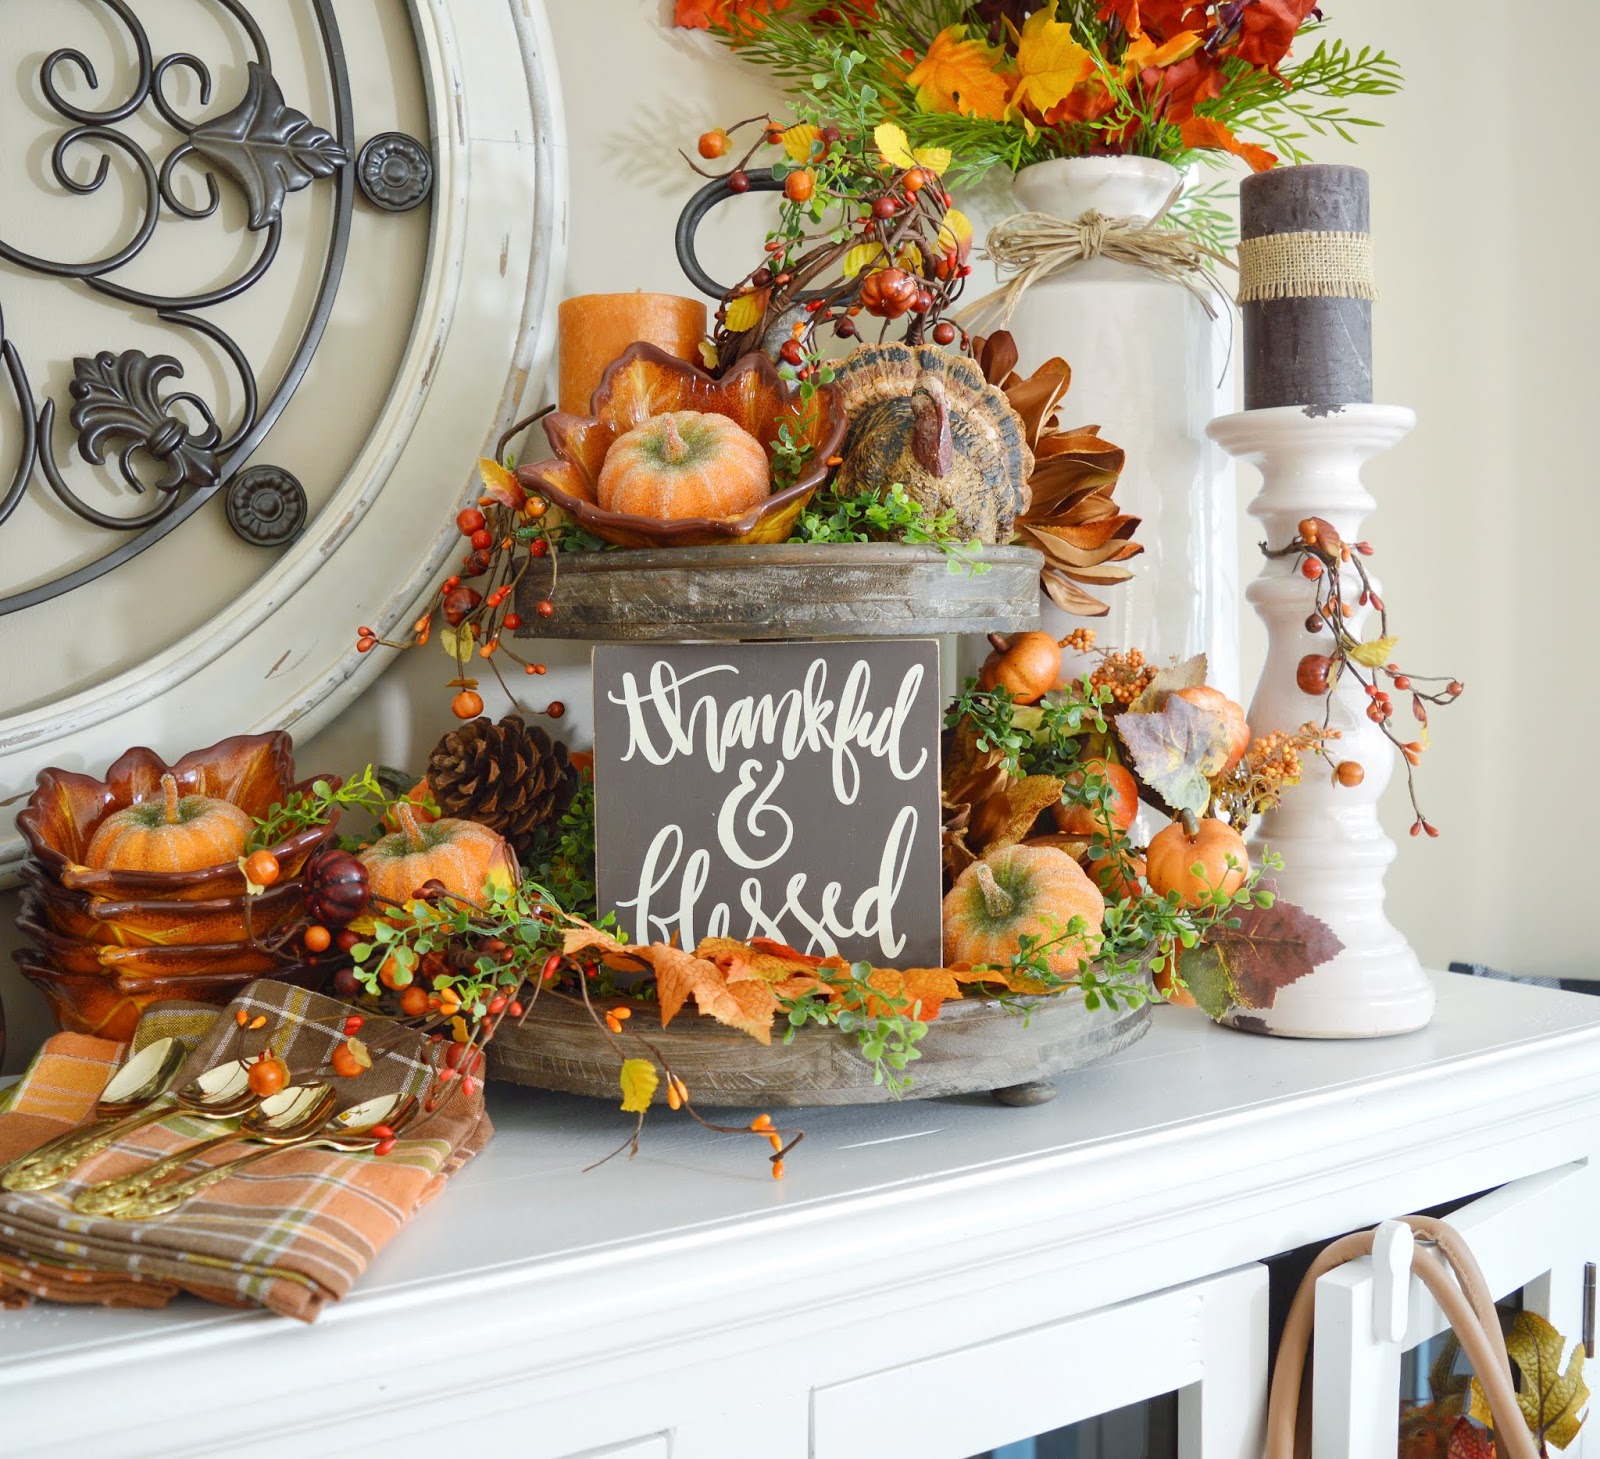 Dining Delight: Kitchen Sideboard Traditional Fall Decor